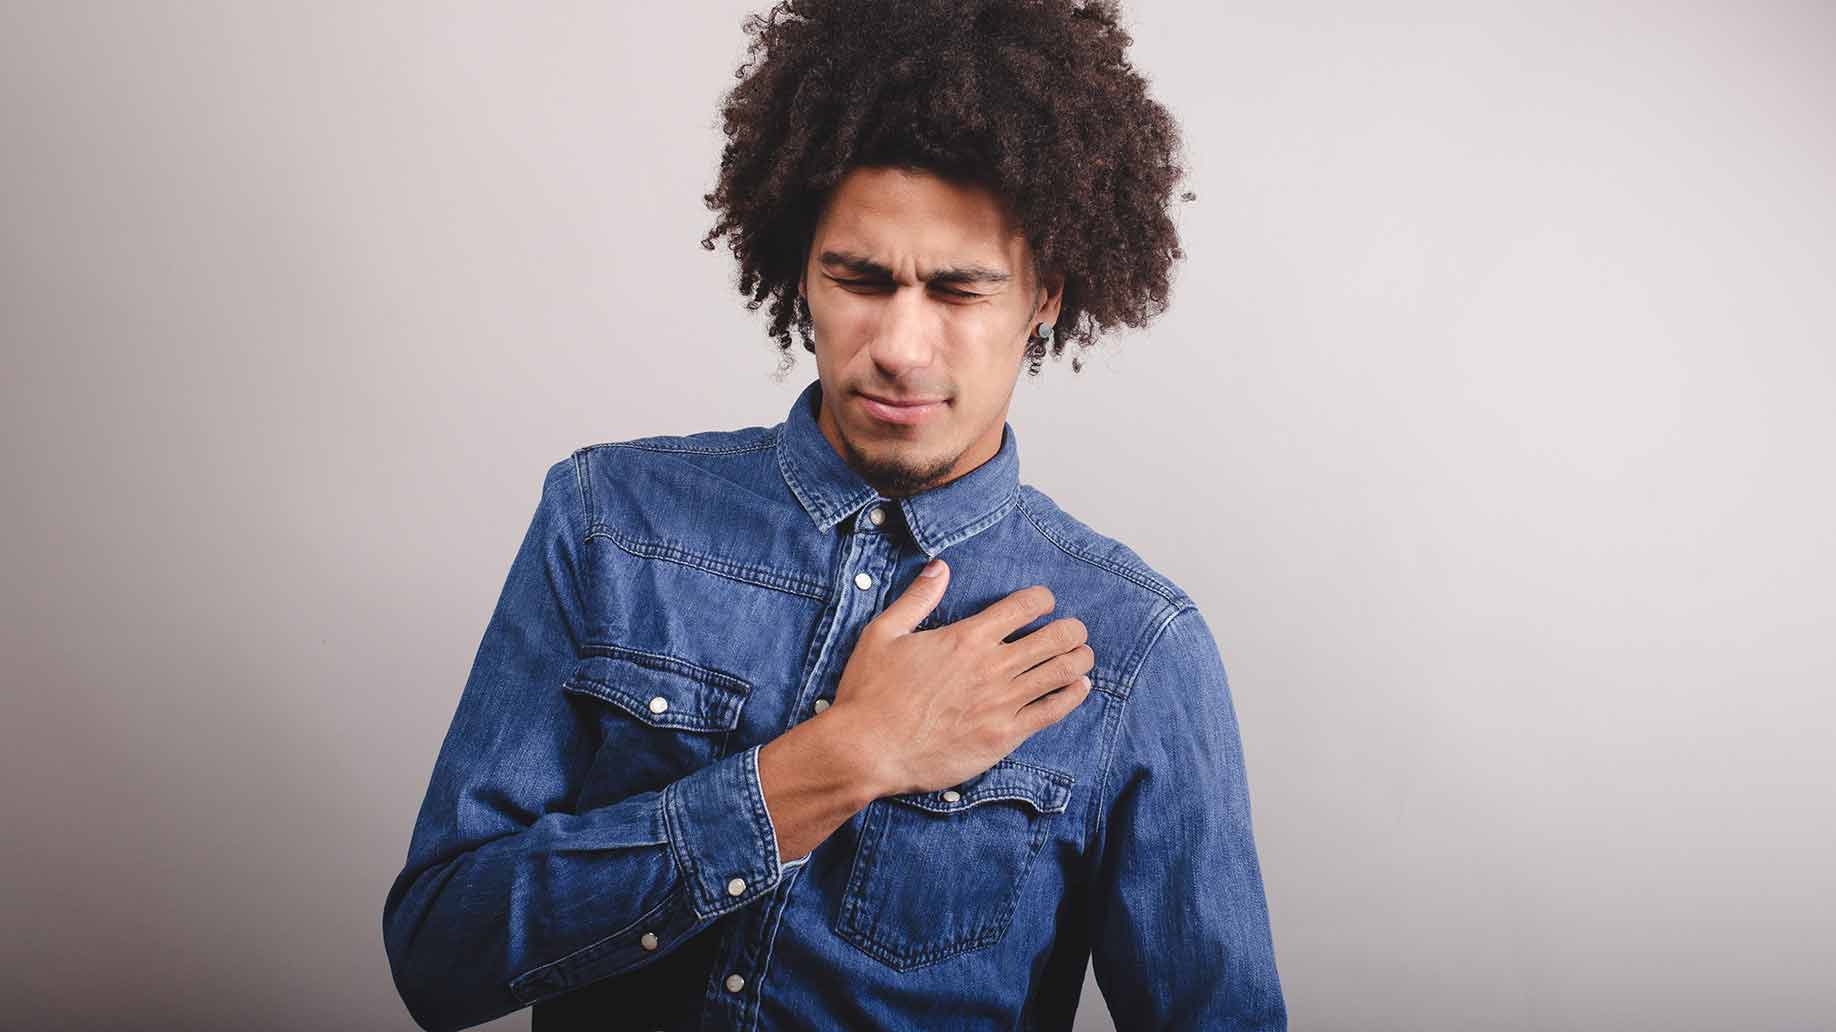 Anxiety Chest Pain: Symptoms, Home Remedies, and More